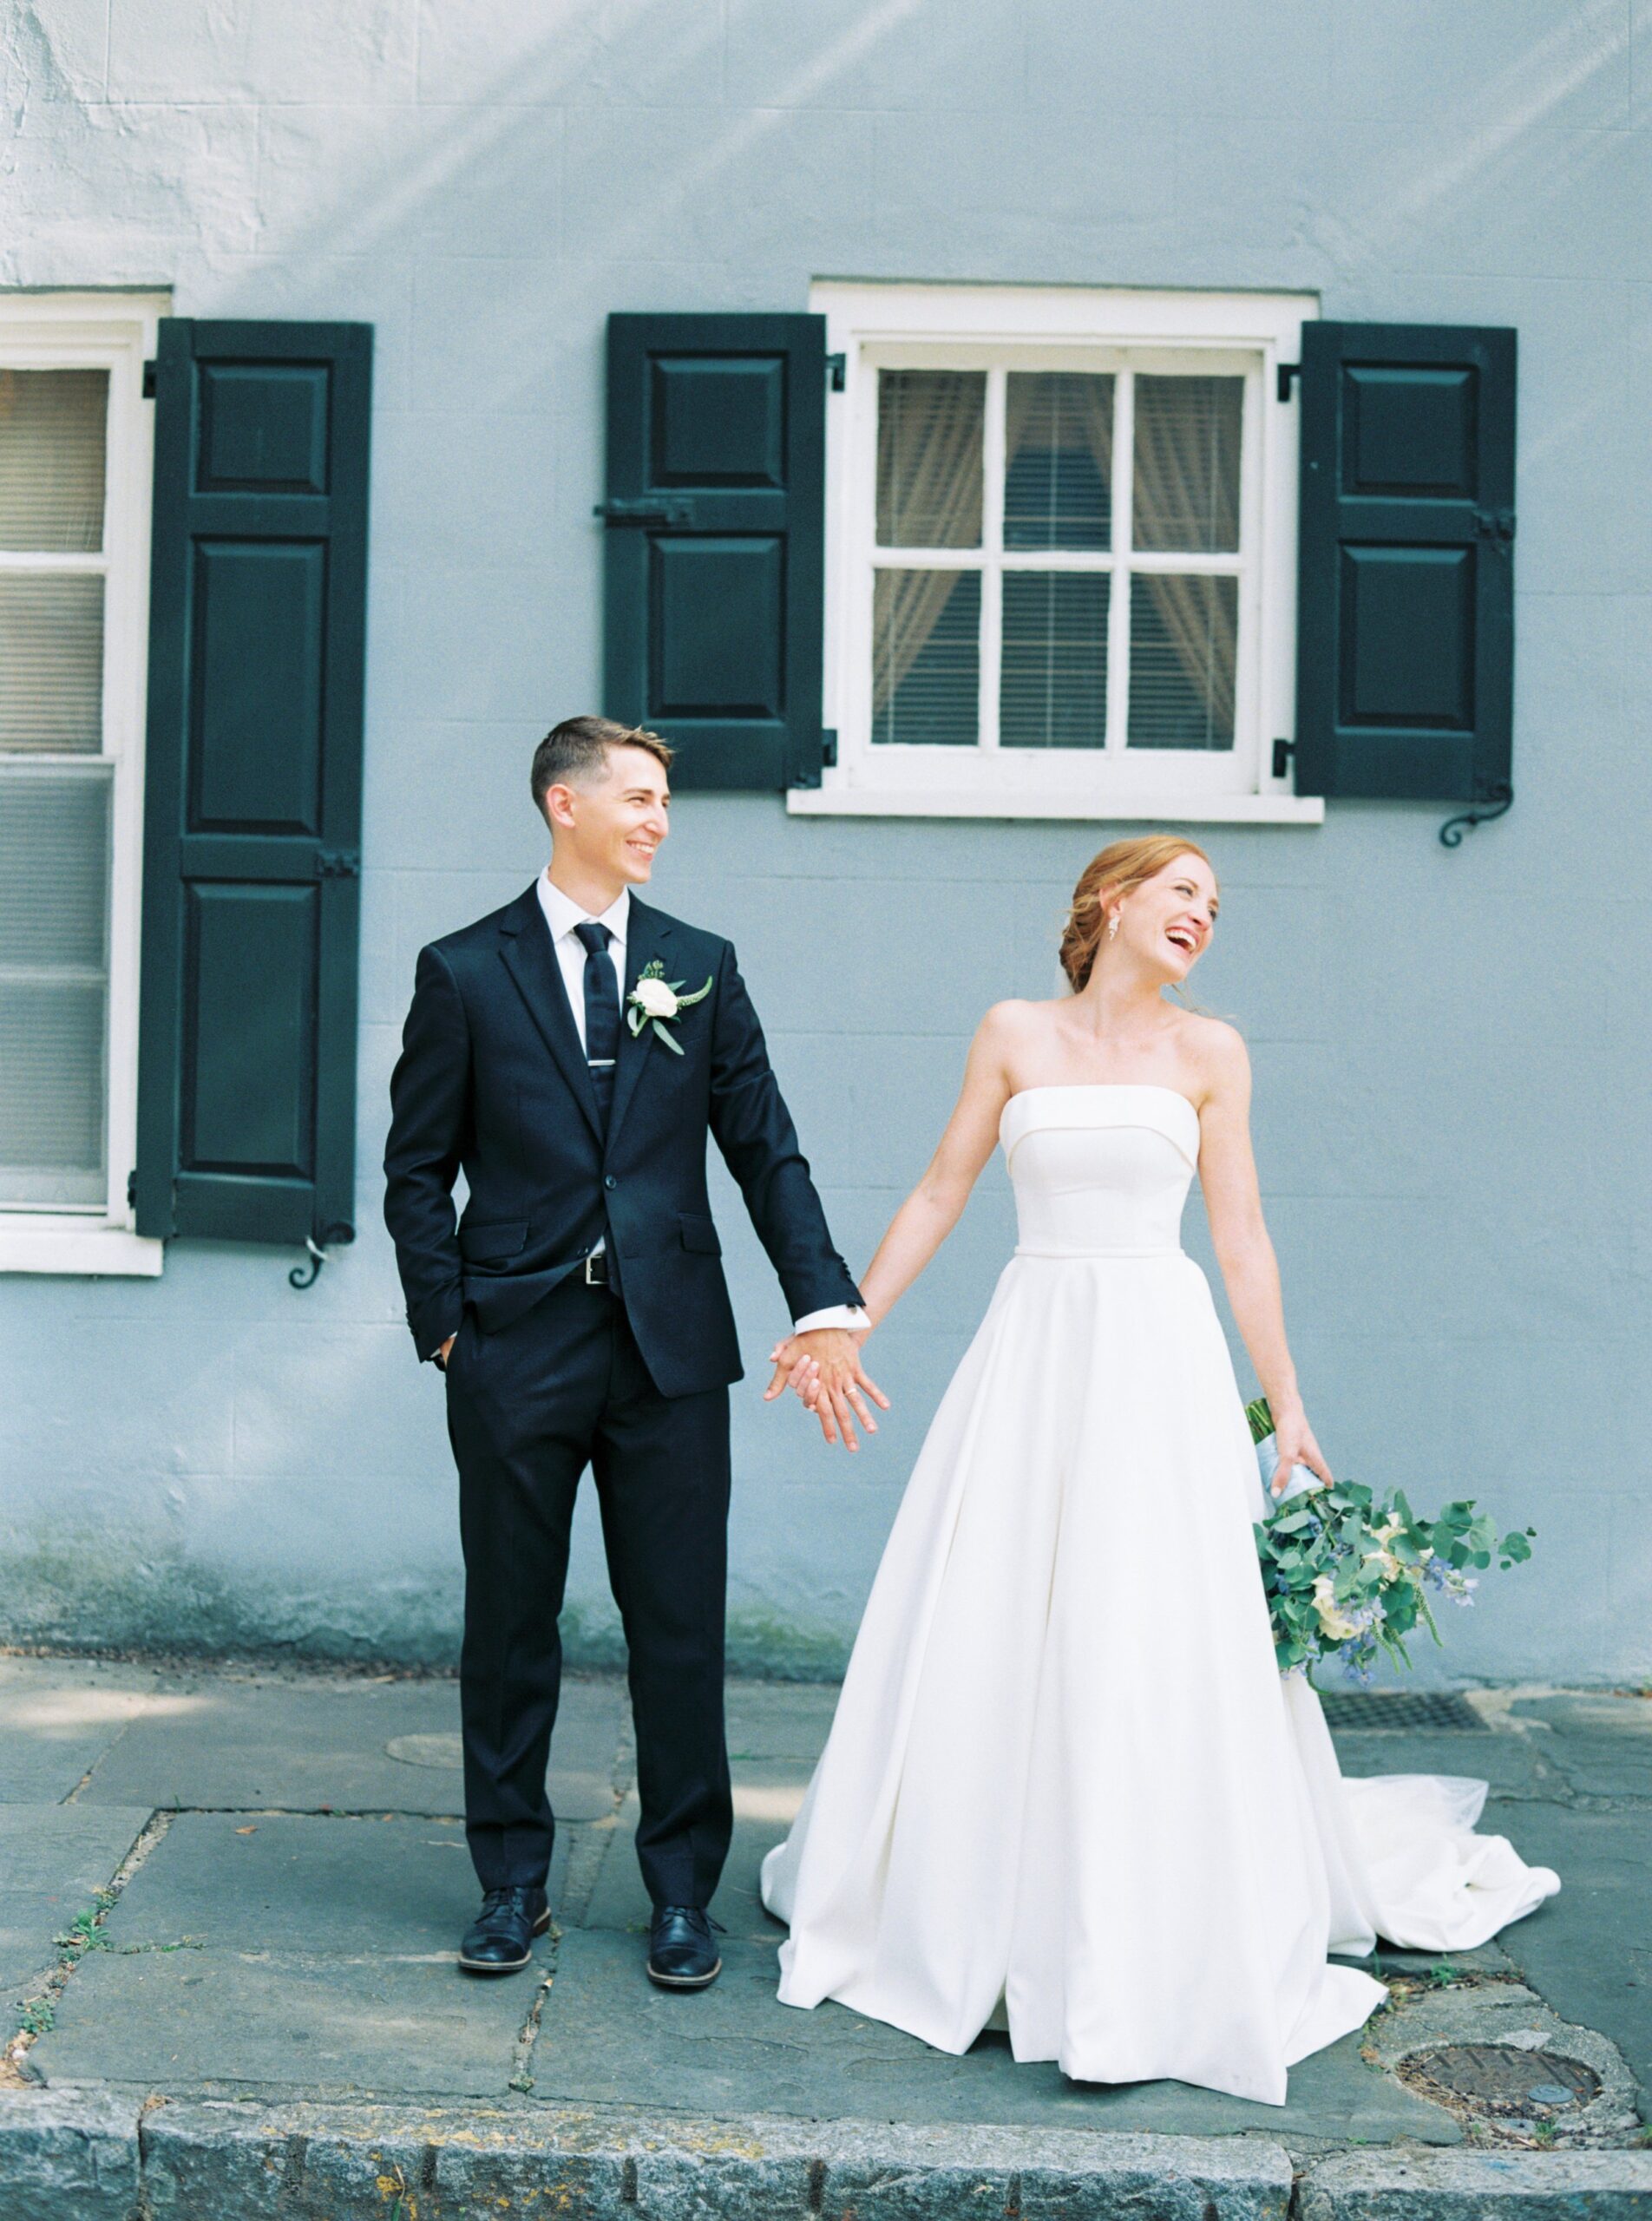 bride and groom laugh with pedestrians walking by during downtown Charleston wedding portraits.